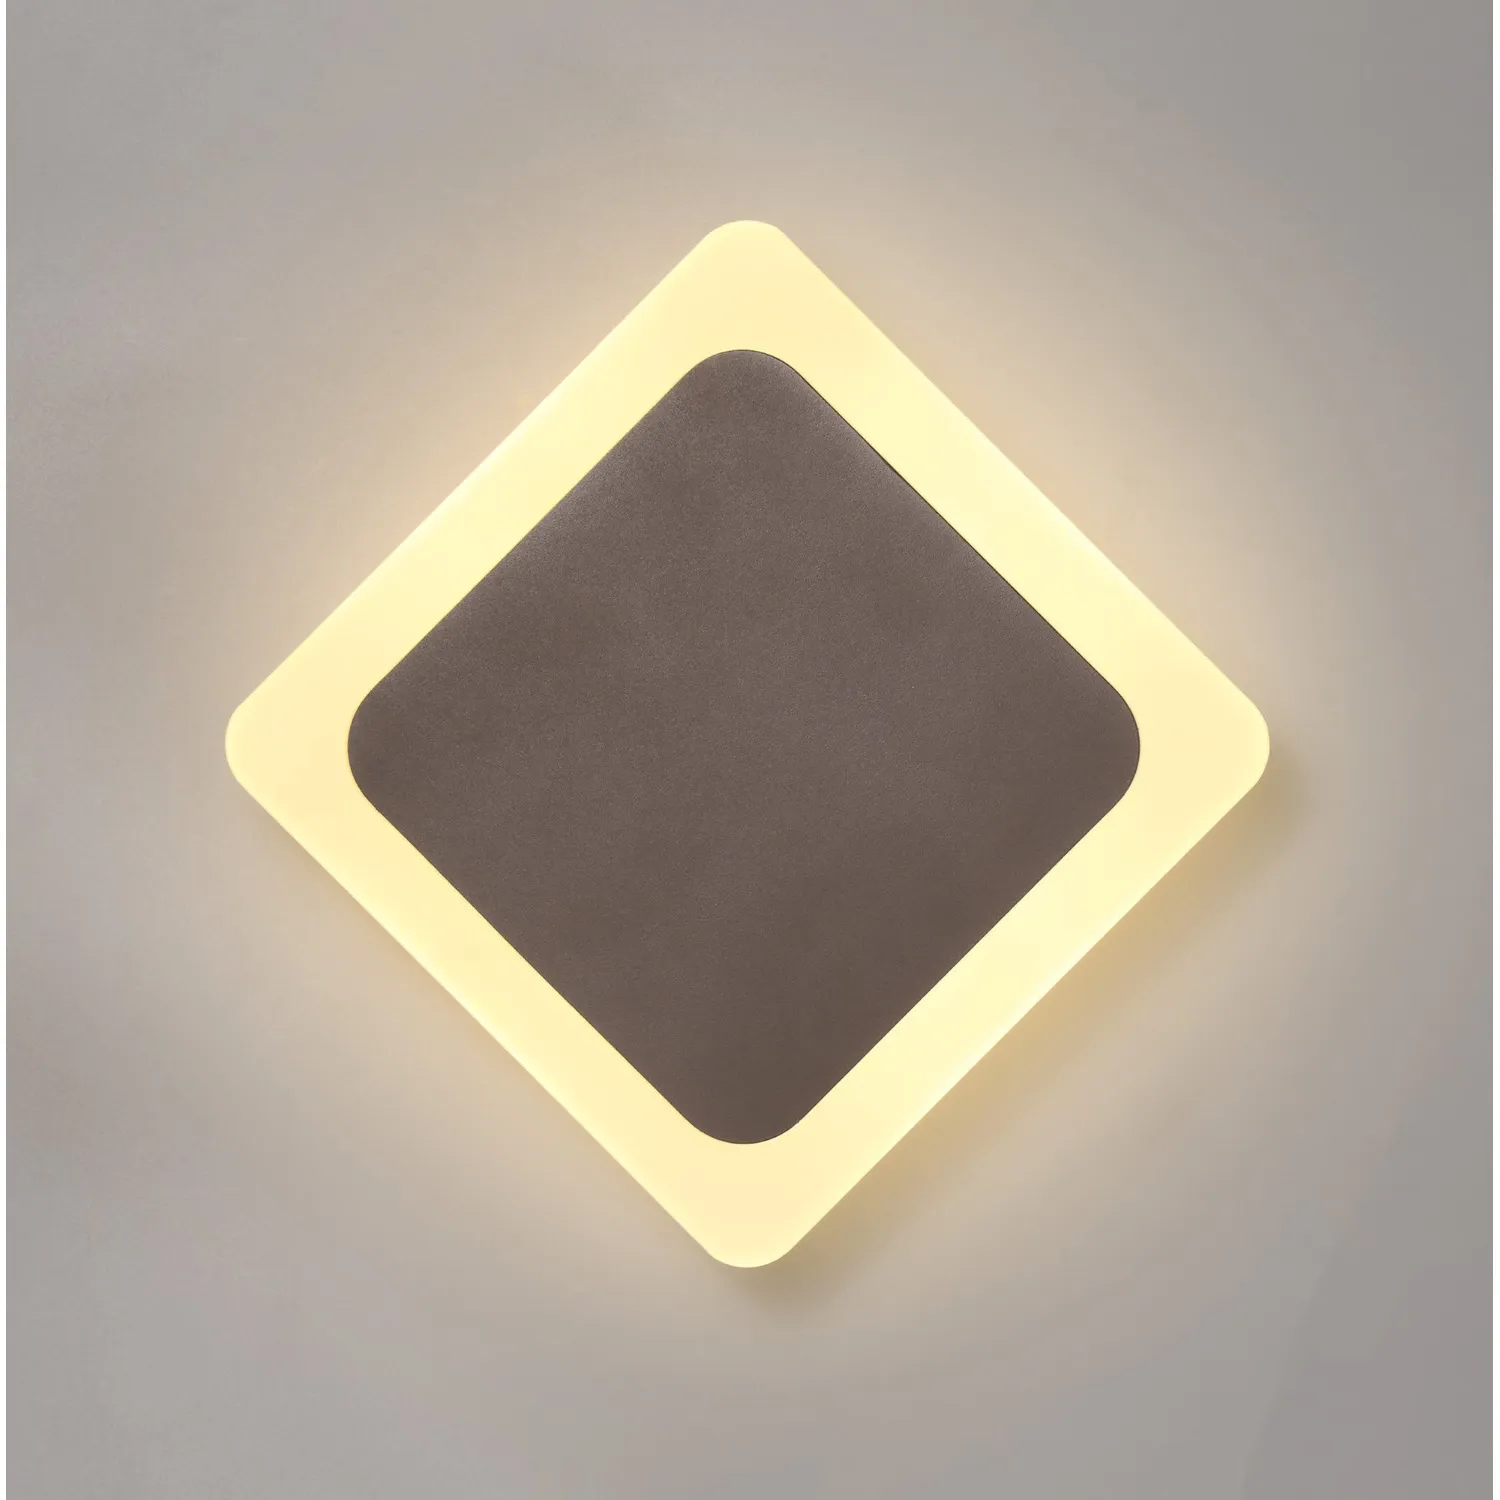 Edgware Magnetic Base Wall Lamp, 12W LED 3000K 498lm, 15 19cm Diamond Centre, Coffee Acrylic Frosted Diffuser